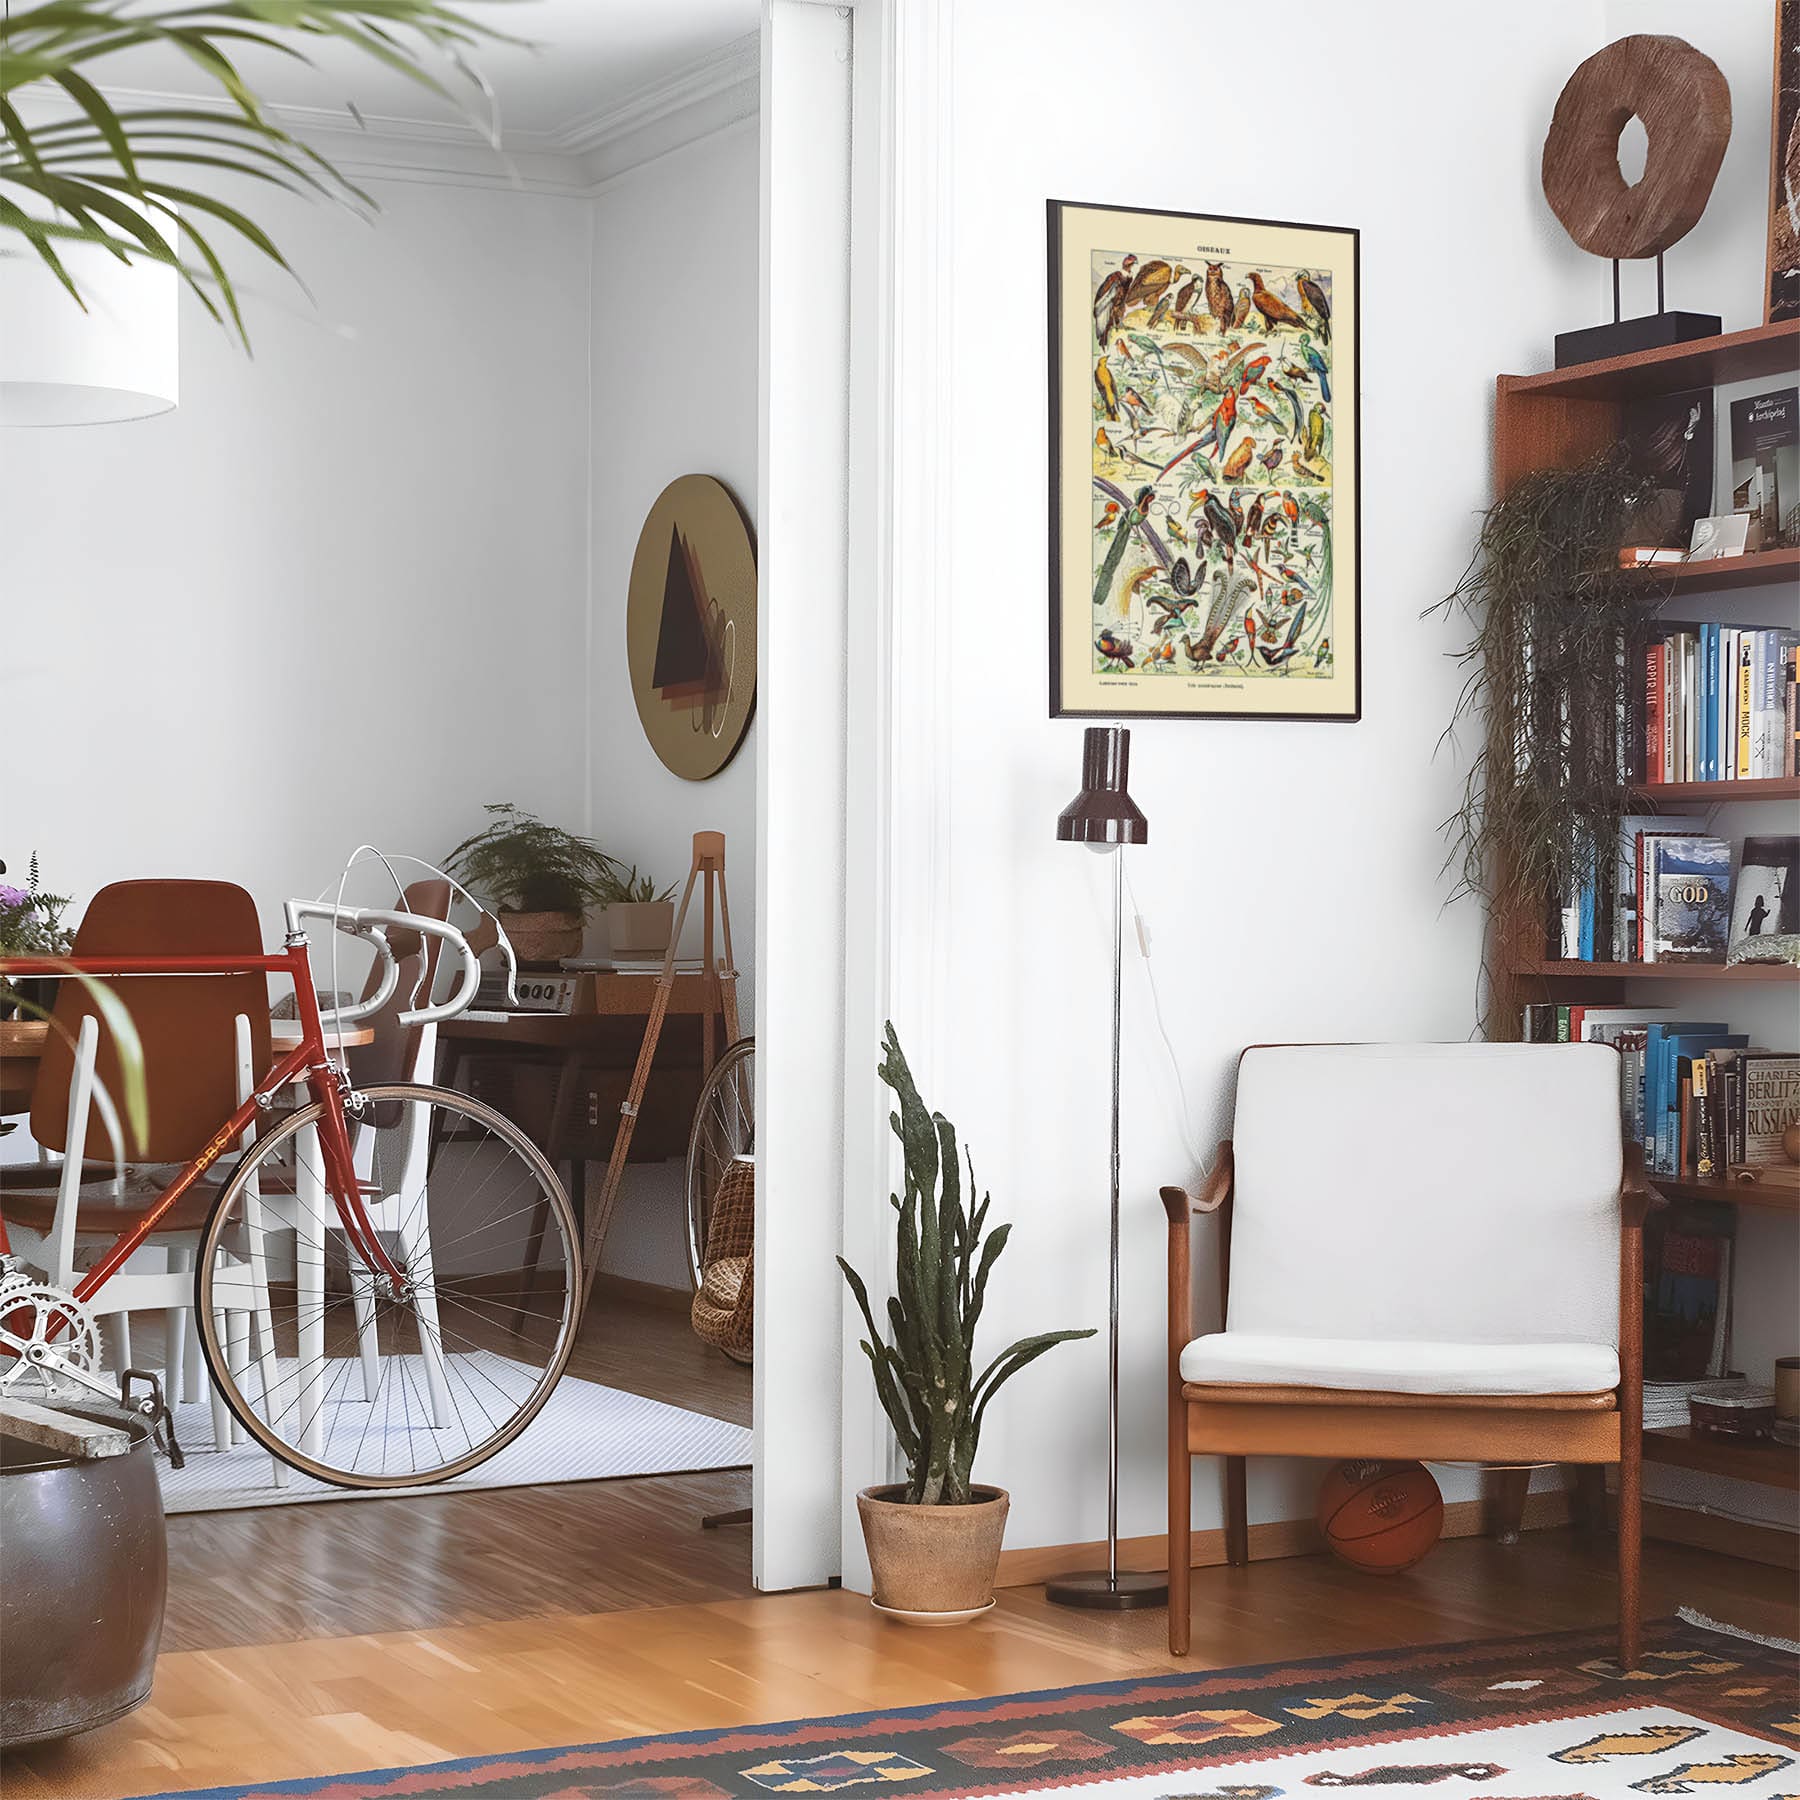 Eclectic living room with a road bike, bookshelf and house plants that features framed artwork of a Wild Birds above a chair and lamp